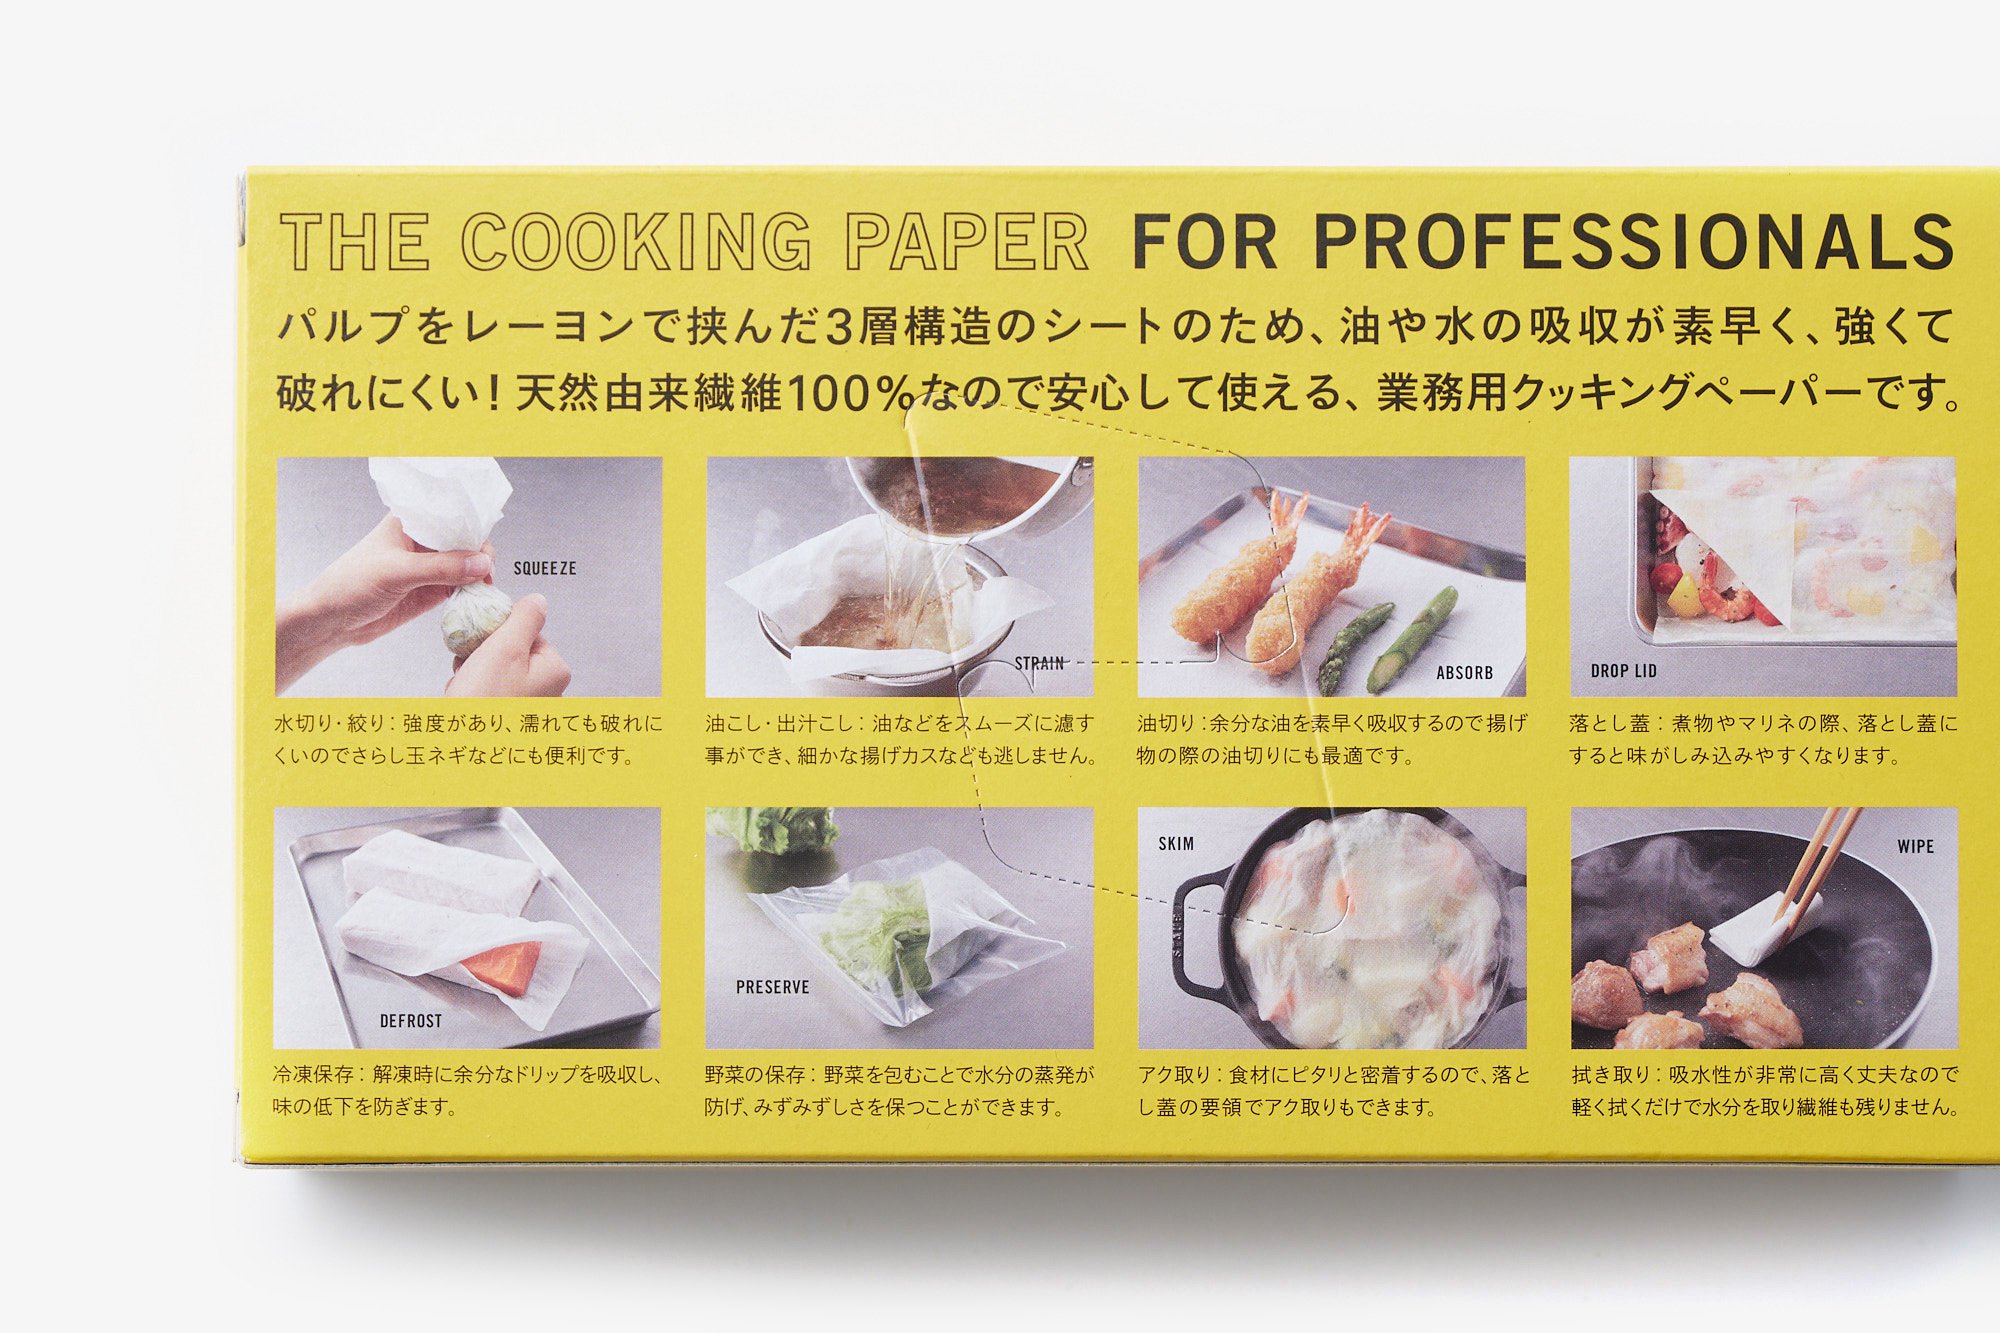 THE COOKING PAPER